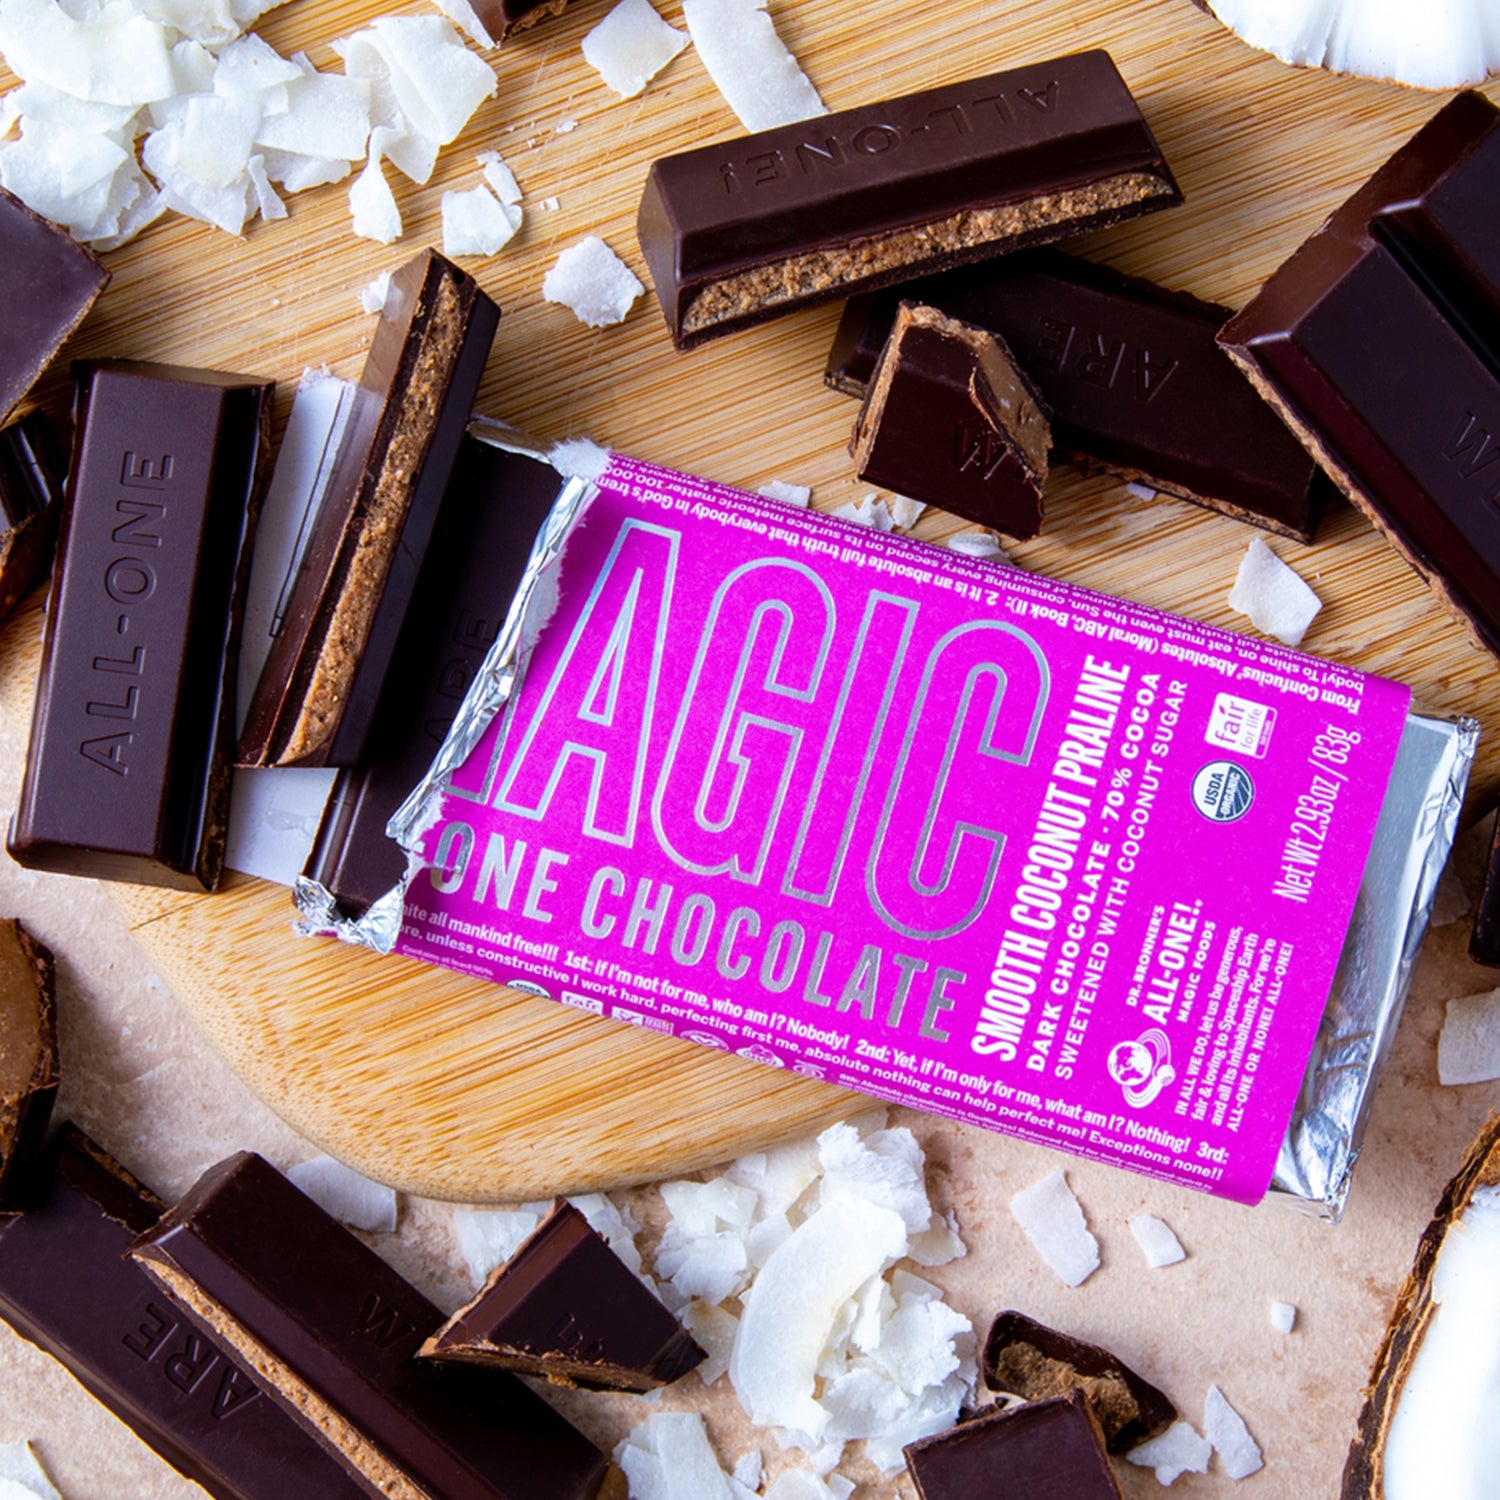 Dr. Bronner's Magic All-One Chocolate - Smooth Coconut Praline